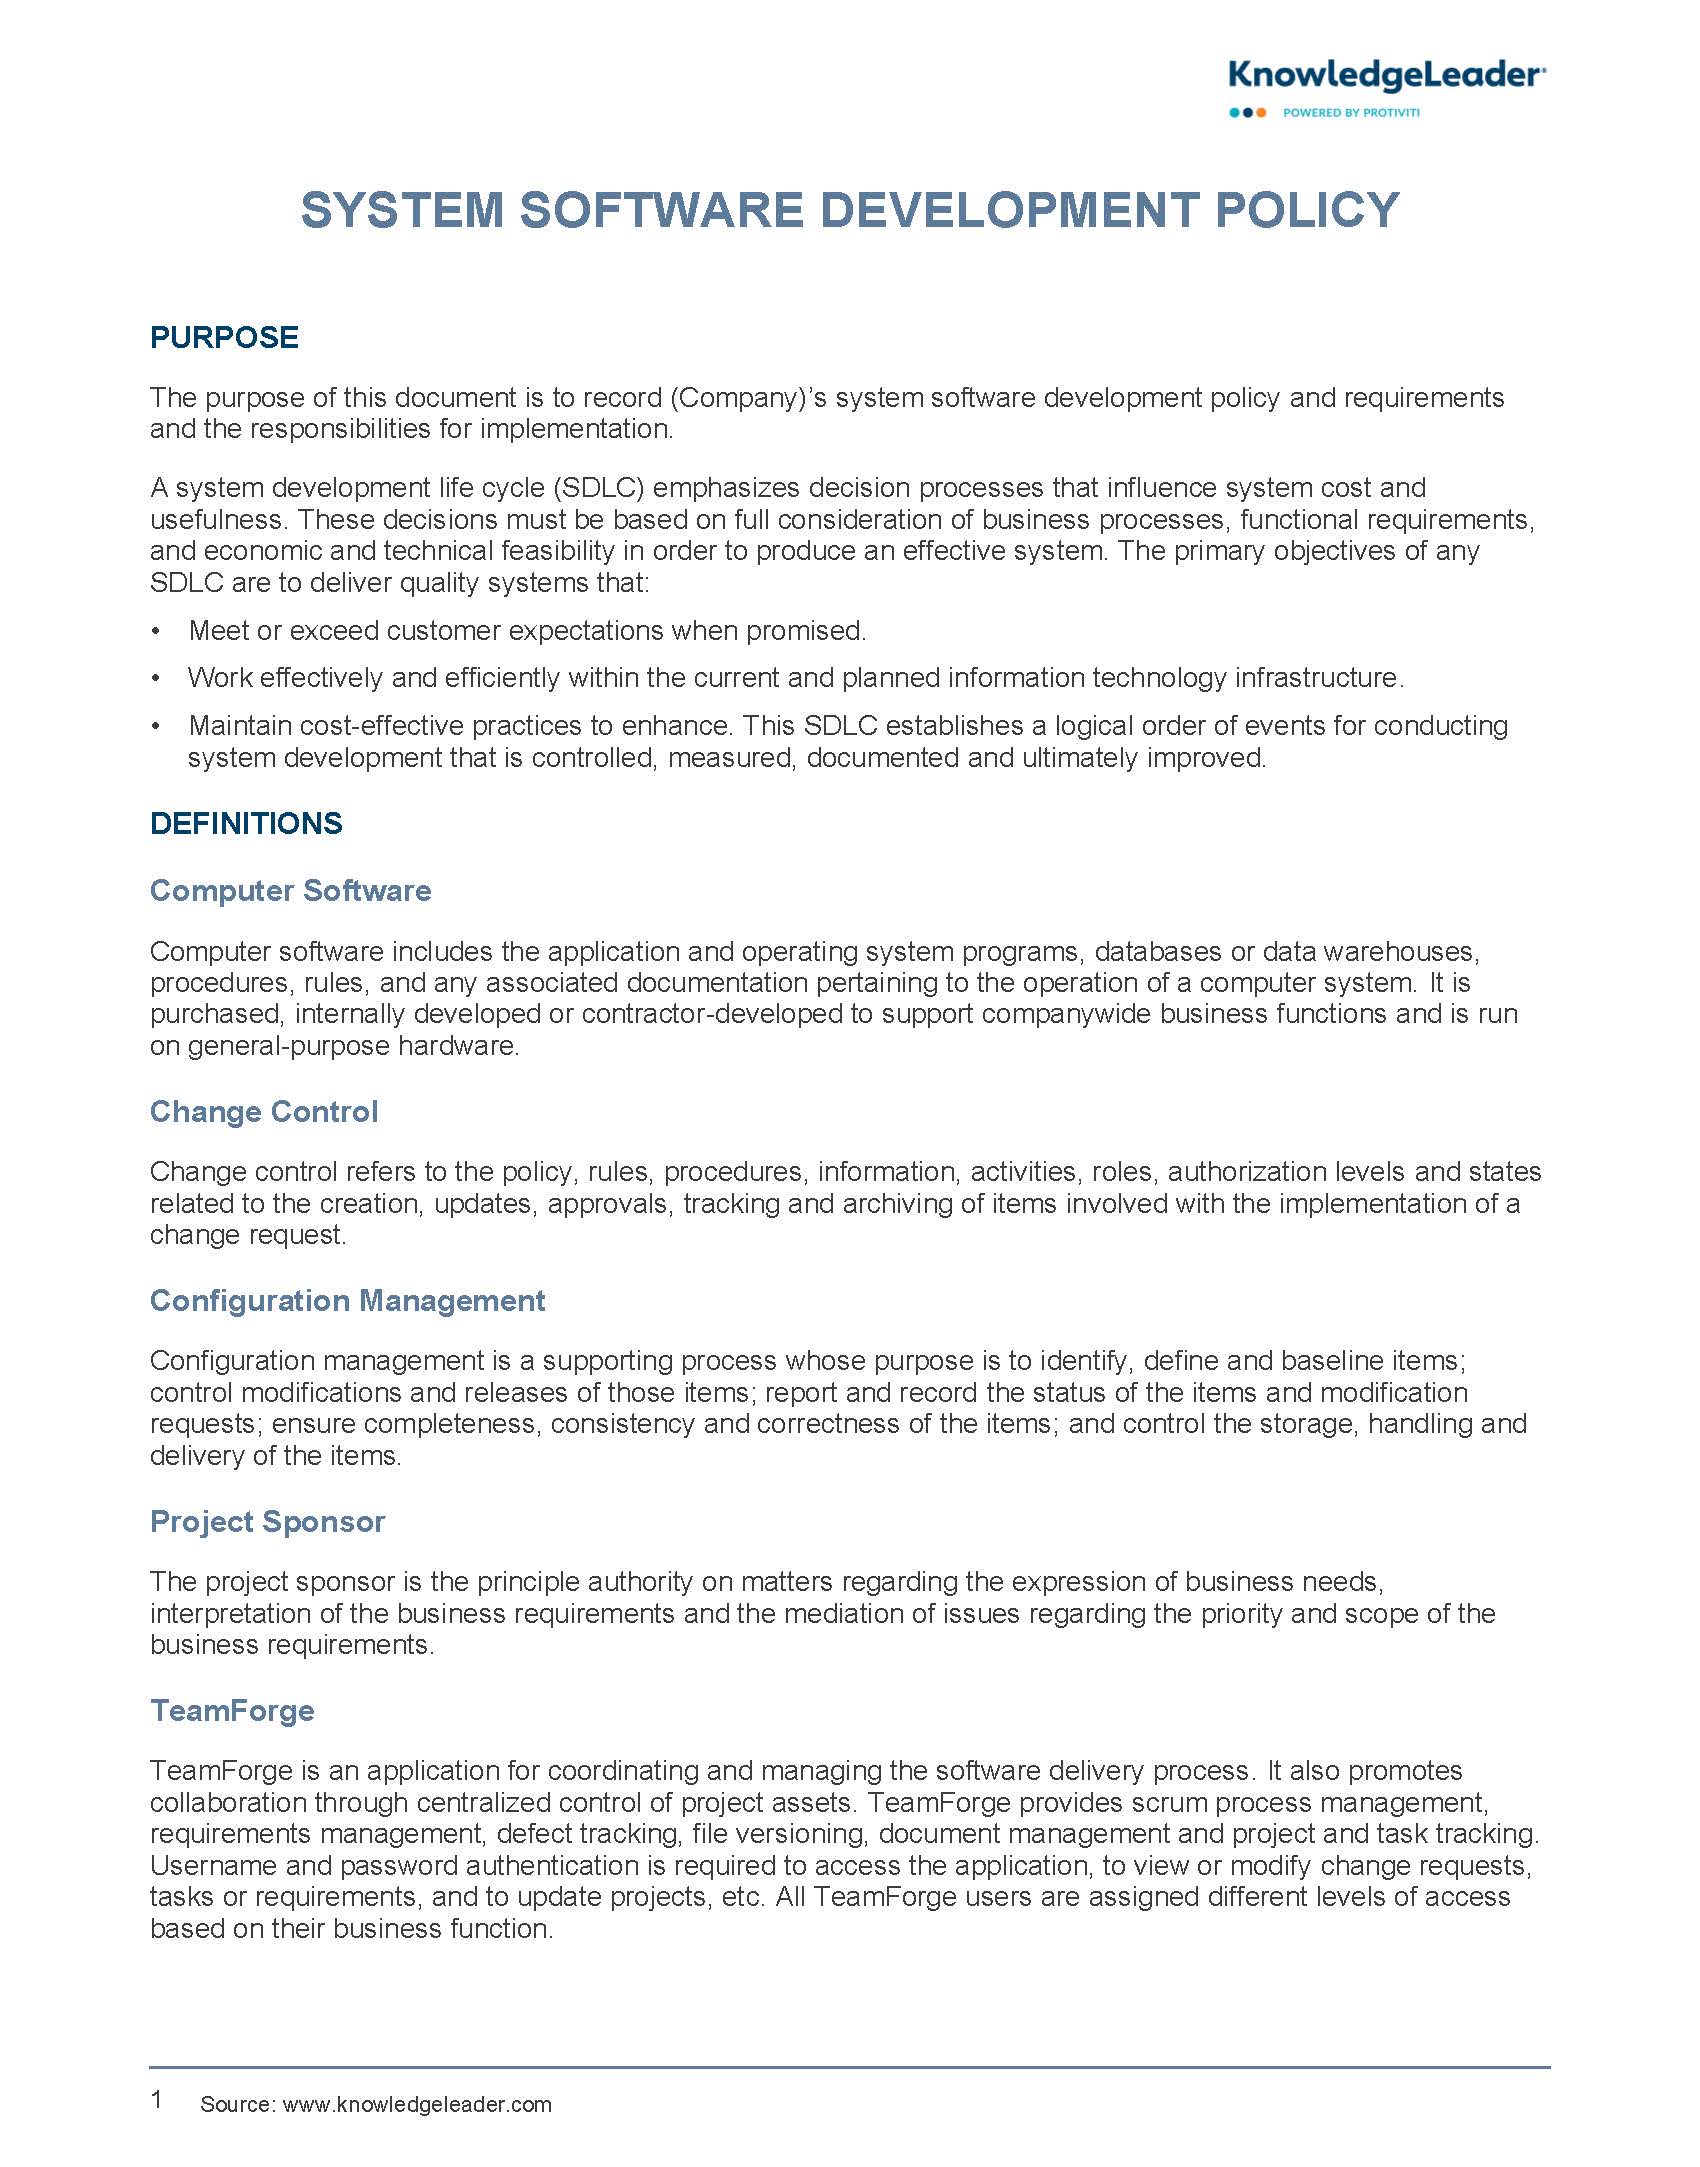 Screenshot of the first page of System Software Development Policy